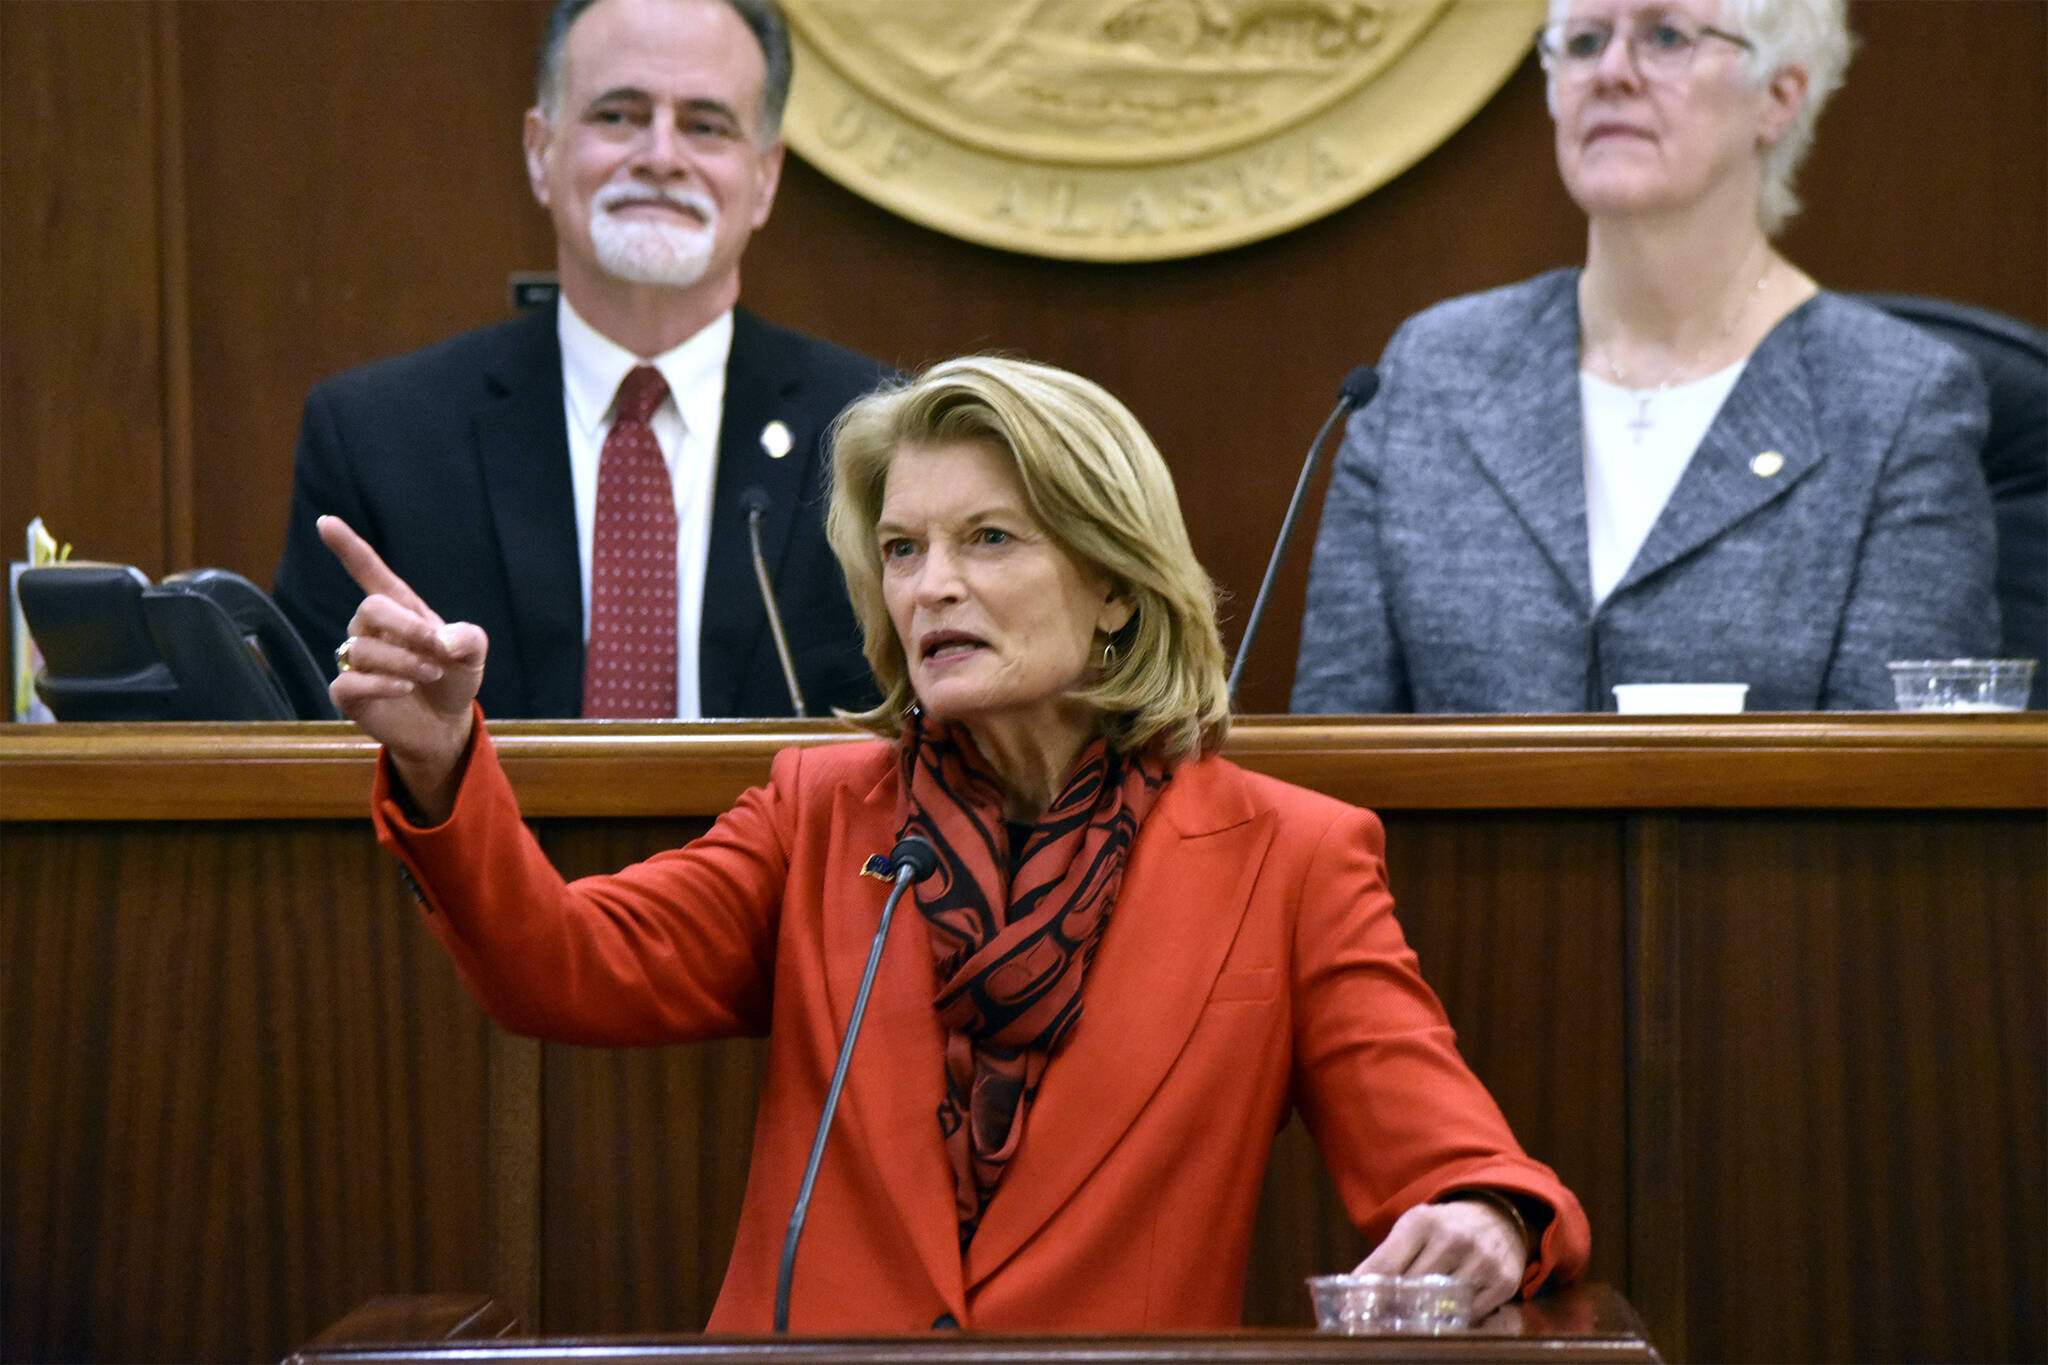 Peter Segall / Juneau Empire 
U.S. Sen. Lisa Murkowski, R-Alaska, gave her annual address to the Alaska State Legislature Tuesday, Feb. 22, 2022, at the Capitol building in Juneau. Murkowski’s speech emphasized bipartisanship and making Alaska ready for the opportunities brought by the recent infrastructure package.